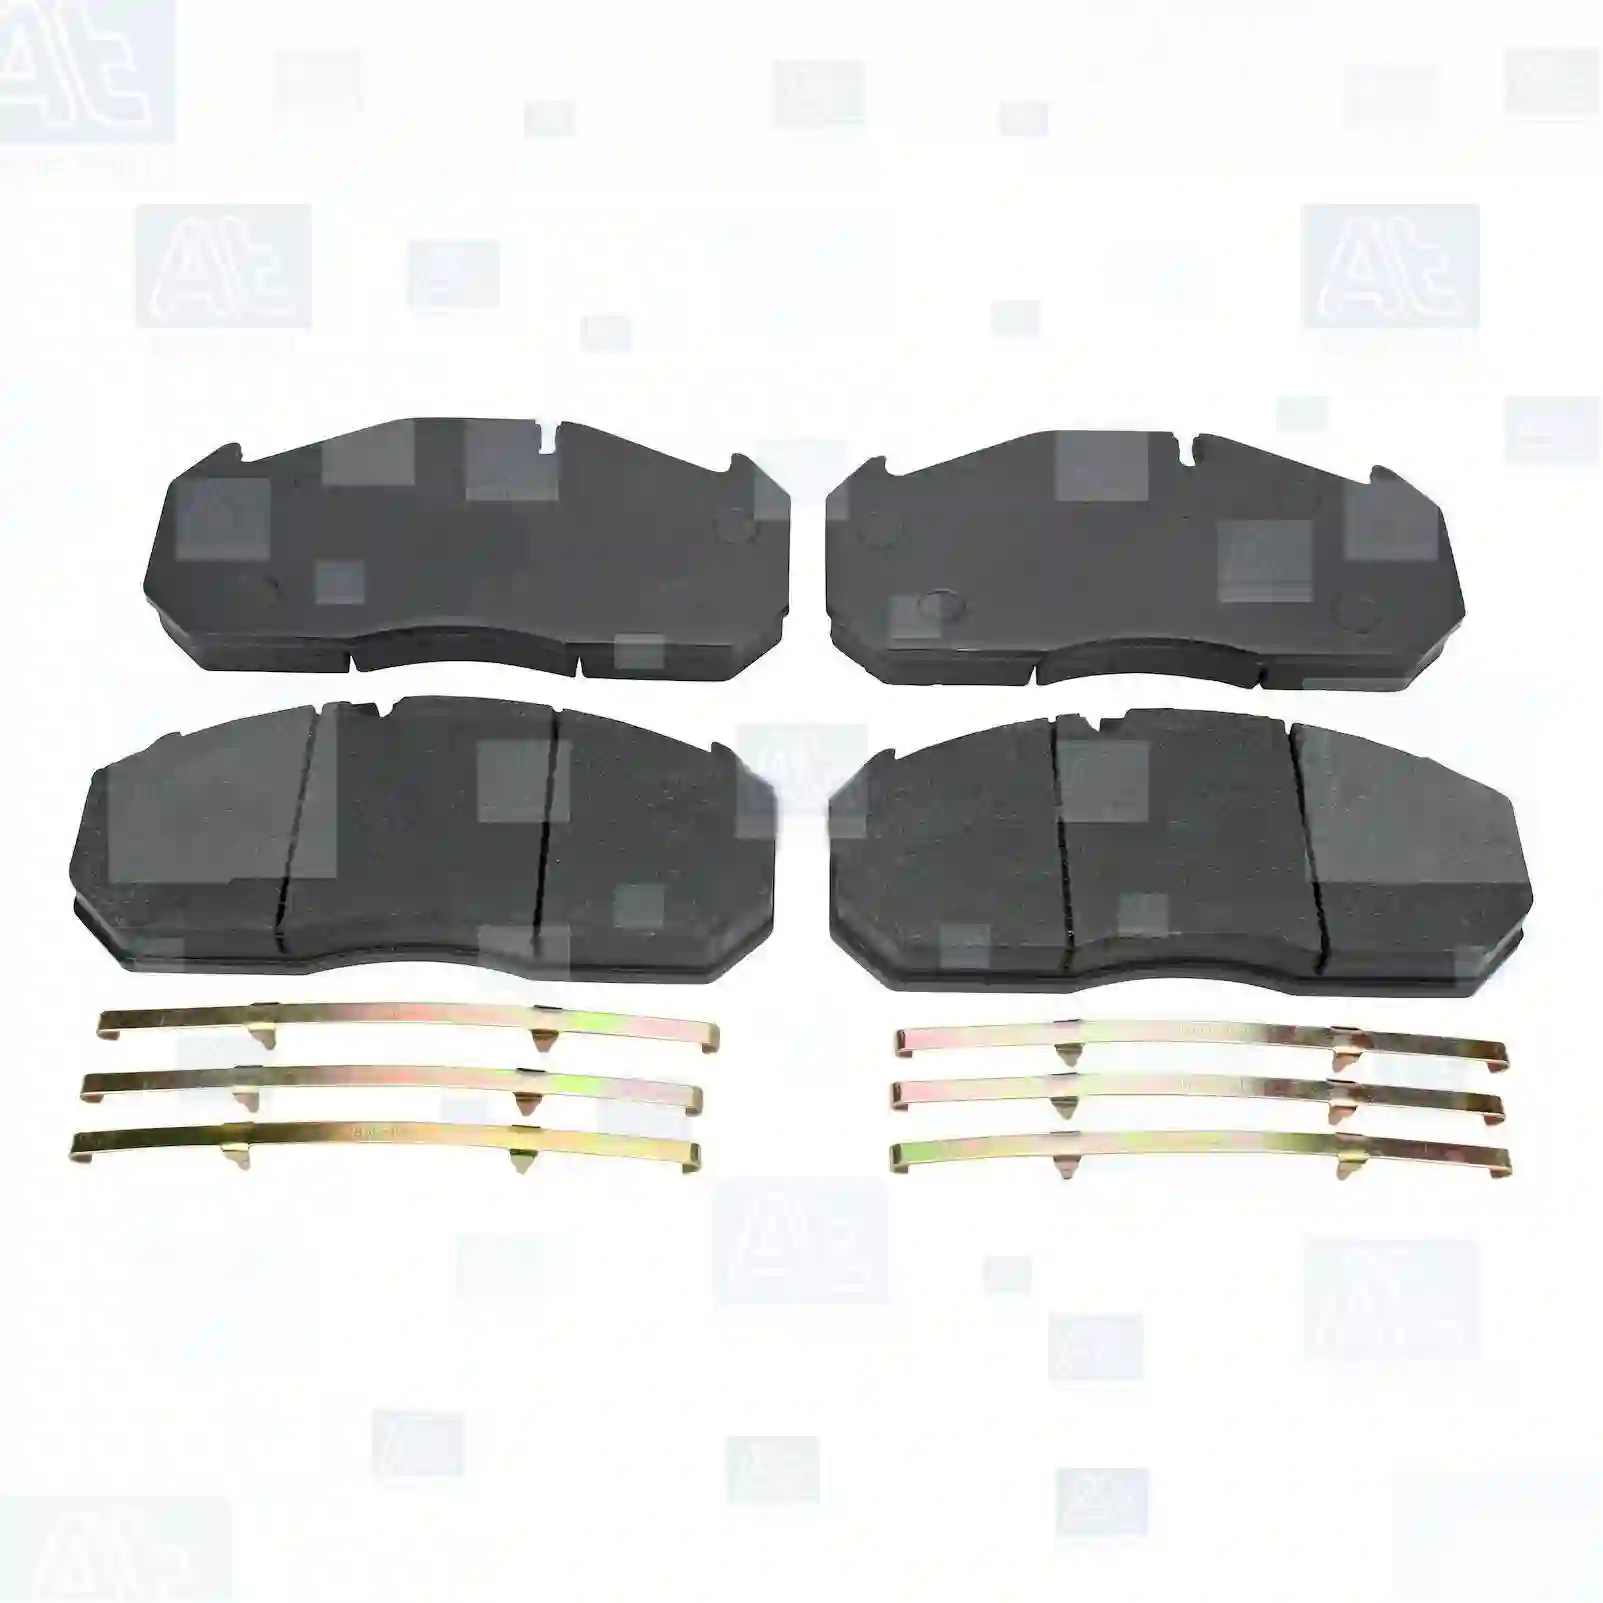 Disc brake pad kit, 77713623, 08108206036, 08285388435, 08285388533, 08285408463, 08285408534, 81508205005, 81508205006, 81508205007, 81508205020, 81508205021, 81508205039, 81508205040, 81508205041, 81508205047, 81508205048, 81508205064, 81508205066, 81508206000, 81508206001, 81508206002, 81508206003, 81508206004, 81508206005, 81508206014, 81508206015, 81508206016, 81508206017, 81508206019, 81508206024, 81508206025, 81508206026, 81508206027, 81508206034, 81508206035, 81508206036, 81508206038, 81508206044, 81508206045, 81508206046, 82854084630, 82854085340, 0024200820, 0024205520, 0034205520, 0034208420, 3564210210, 5010151214, 7073453861, 0068320504, MDP3030K, MDP5017, MDP5038, MDP5054, MDP5065, 1057004400, 1057004400, 68320504NGZ, 8285388435, 8285388533, 8285388583, 8285408453, 8285408463, 82854084640, 8285408534, 8285521000, 8285522000, 8285525000, 8285526000, ZG50417-0008 ||  77713623 At Spare Part | Engine, Accelerator Pedal, Camshaft, Connecting Rod, Crankcase, Crankshaft, Cylinder Head, Engine Suspension Mountings, Exhaust Manifold, Exhaust Gas Recirculation, Filter Kits, Flywheel Housing, General Overhaul Kits, Engine, Intake Manifold, Oil Cleaner, Oil Cooler, Oil Filter, Oil Pump, Oil Sump, Piston & Liner, Sensor & Switch, Timing Case, Turbocharger, Cooling System, Belt Tensioner, Coolant Filter, Coolant Pipe, Corrosion Prevention Agent, Drive, Expansion Tank, Fan, Intercooler, Monitors & Gauges, Radiator, Thermostat, V-Belt / Timing belt, Water Pump, Fuel System, Electronical Injector Unit, Feed Pump, Fuel Filter, cpl., Fuel Gauge Sender,  Fuel Line, Fuel Pump, Fuel Tank, Injection Line Kit, Injection Pump, Exhaust System, Clutch & Pedal, Gearbox, Propeller Shaft, Axles, Brake System, Hubs & Wheels, Suspension, Leaf Spring, Universal Parts / Accessories, Steering, Electrical System, Cabin Disc brake pad kit, 77713623, 08108206036, 08285388435, 08285388533, 08285408463, 08285408534, 81508205005, 81508205006, 81508205007, 81508205020, 81508205021, 81508205039, 81508205040, 81508205041, 81508205047, 81508205048, 81508205064, 81508205066, 81508206000, 81508206001, 81508206002, 81508206003, 81508206004, 81508206005, 81508206014, 81508206015, 81508206016, 81508206017, 81508206019, 81508206024, 81508206025, 81508206026, 81508206027, 81508206034, 81508206035, 81508206036, 81508206038, 81508206044, 81508206045, 81508206046, 82854084630, 82854085340, 0024200820, 0024205520, 0034205520, 0034208420, 3564210210, 5010151214, 7073453861, 0068320504, MDP3030K, MDP5017, MDP5038, MDP5054, MDP5065, 1057004400, 1057004400, 68320504NGZ, 8285388435, 8285388533, 8285388583, 8285408453, 8285408463, 82854084640, 8285408534, 8285521000, 8285522000, 8285525000, 8285526000, ZG50417-0008 ||  77713623 At Spare Part | Engine, Accelerator Pedal, Camshaft, Connecting Rod, Crankcase, Crankshaft, Cylinder Head, Engine Suspension Mountings, Exhaust Manifold, Exhaust Gas Recirculation, Filter Kits, Flywheel Housing, General Overhaul Kits, Engine, Intake Manifold, Oil Cleaner, Oil Cooler, Oil Filter, Oil Pump, Oil Sump, Piston & Liner, Sensor & Switch, Timing Case, Turbocharger, Cooling System, Belt Tensioner, Coolant Filter, Coolant Pipe, Corrosion Prevention Agent, Drive, Expansion Tank, Fan, Intercooler, Monitors & Gauges, Radiator, Thermostat, V-Belt / Timing belt, Water Pump, Fuel System, Electronical Injector Unit, Feed Pump, Fuel Filter, cpl., Fuel Gauge Sender,  Fuel Line, Fuel Pump, Fuel Tank, Injection Line Kit, Injection Pump, Exhaust System, Clutch & Pedal, Gearbox, Propeller Shaft, Axles, Brake System, Hubs & Wheels, Suspension, Leaf Spring, Universal Parts / Accessories, Steering, Electrical System, Cabin